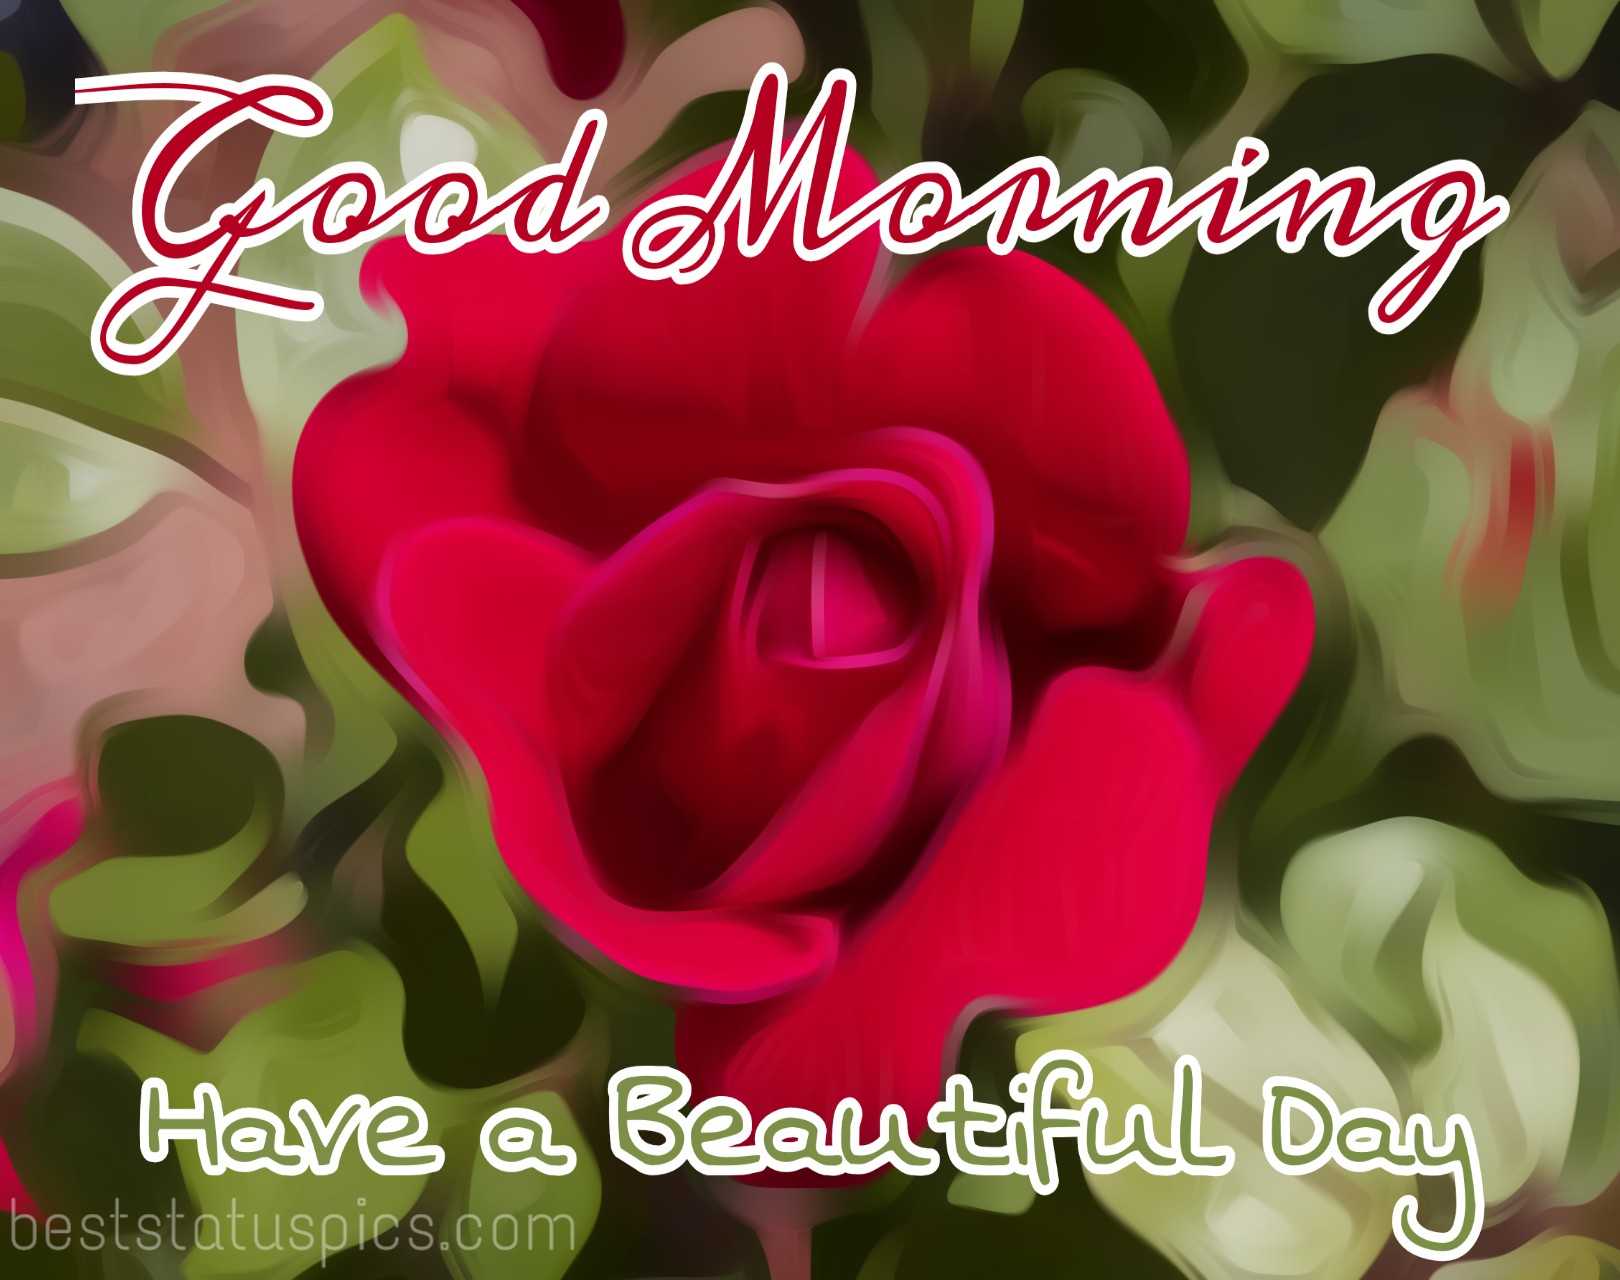 Beautiful Good morning pictures with rose flower